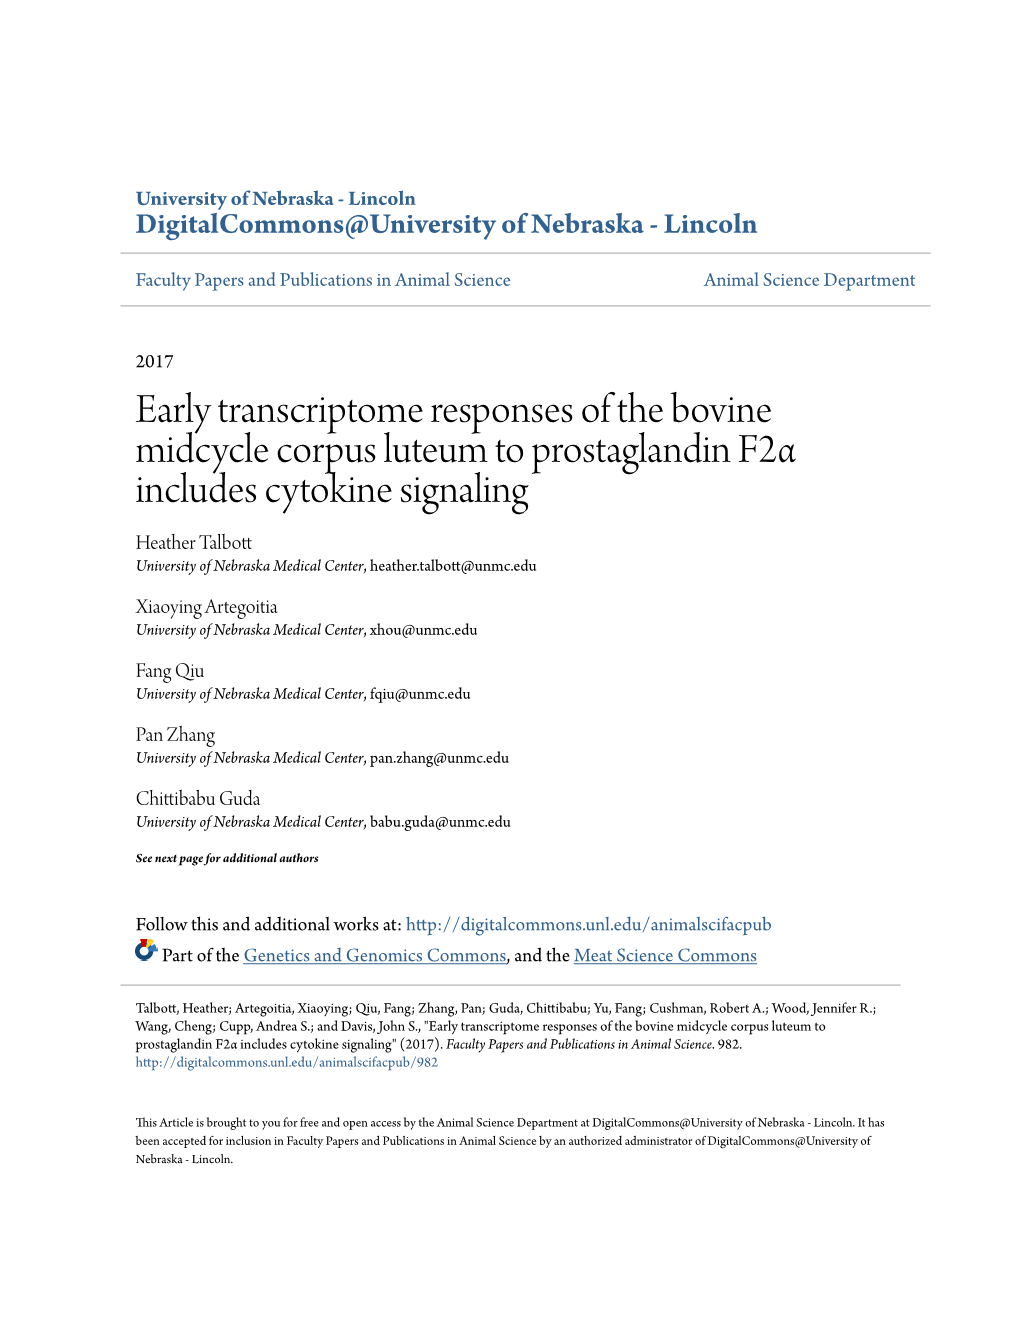 Early Transcriptome Responses of the Bovine Midcycle Corpus Luteum To